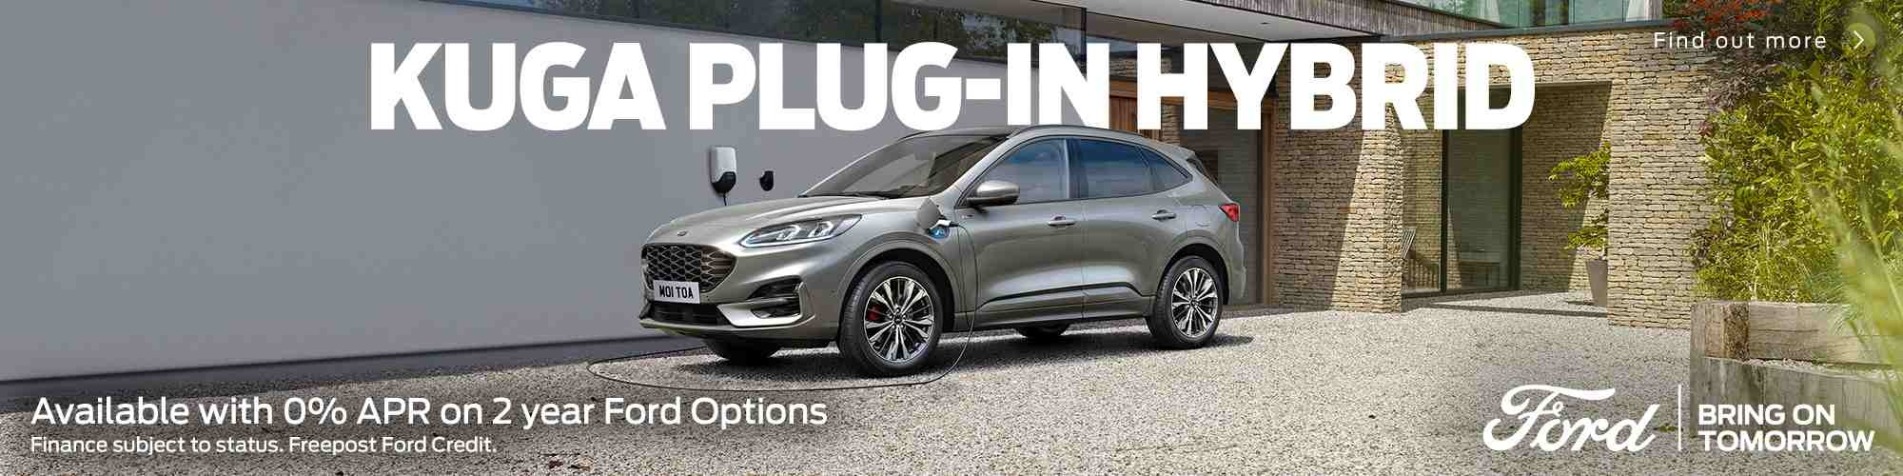 Ford Kuga Q4 Plug In Banner